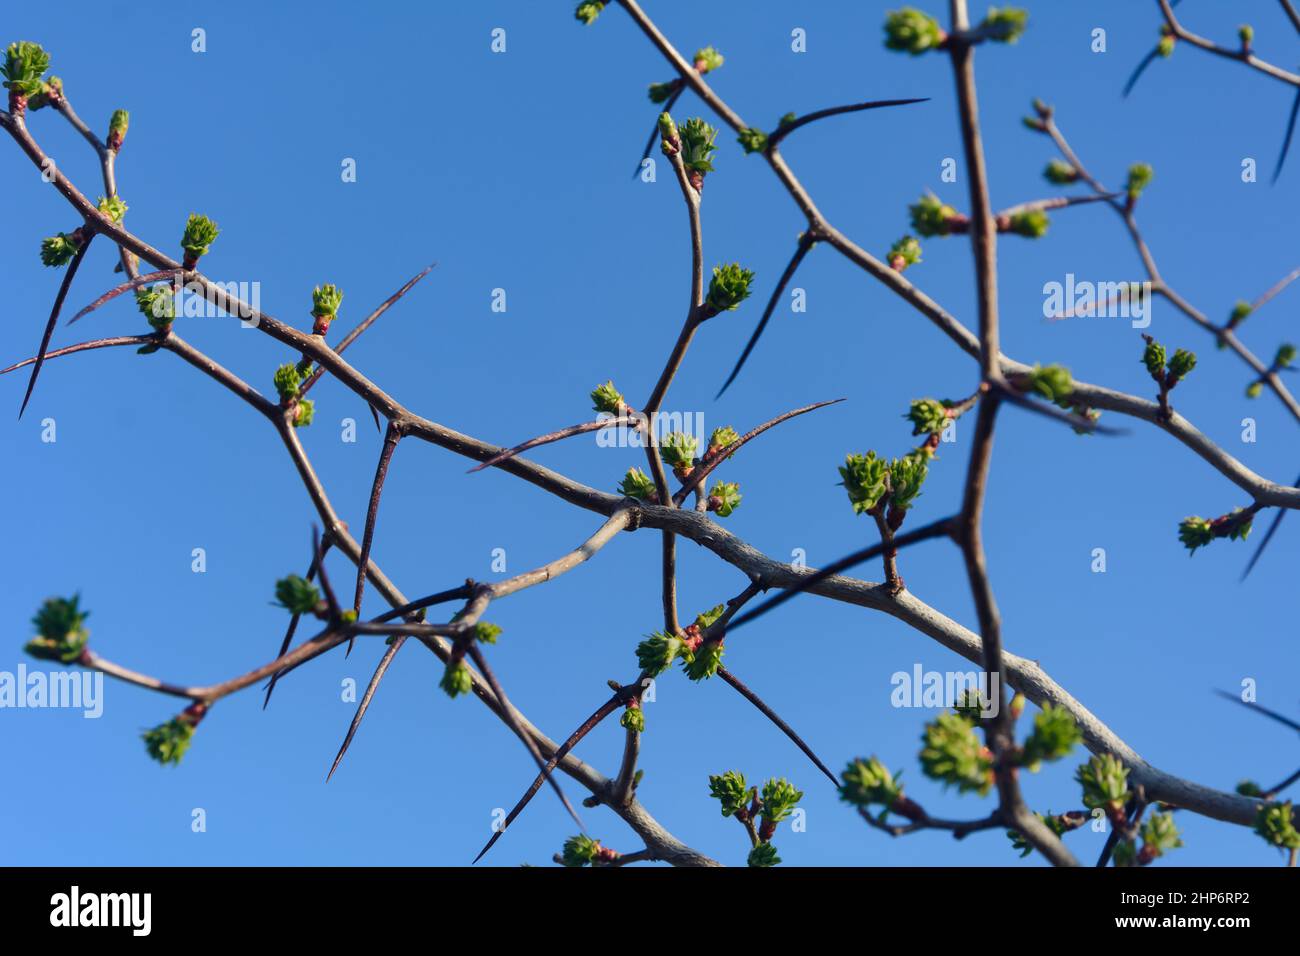 Branch of hawthorn with thorns and new leaves in early spring. Blue sky background, close-up, selective focus. Stock Photo